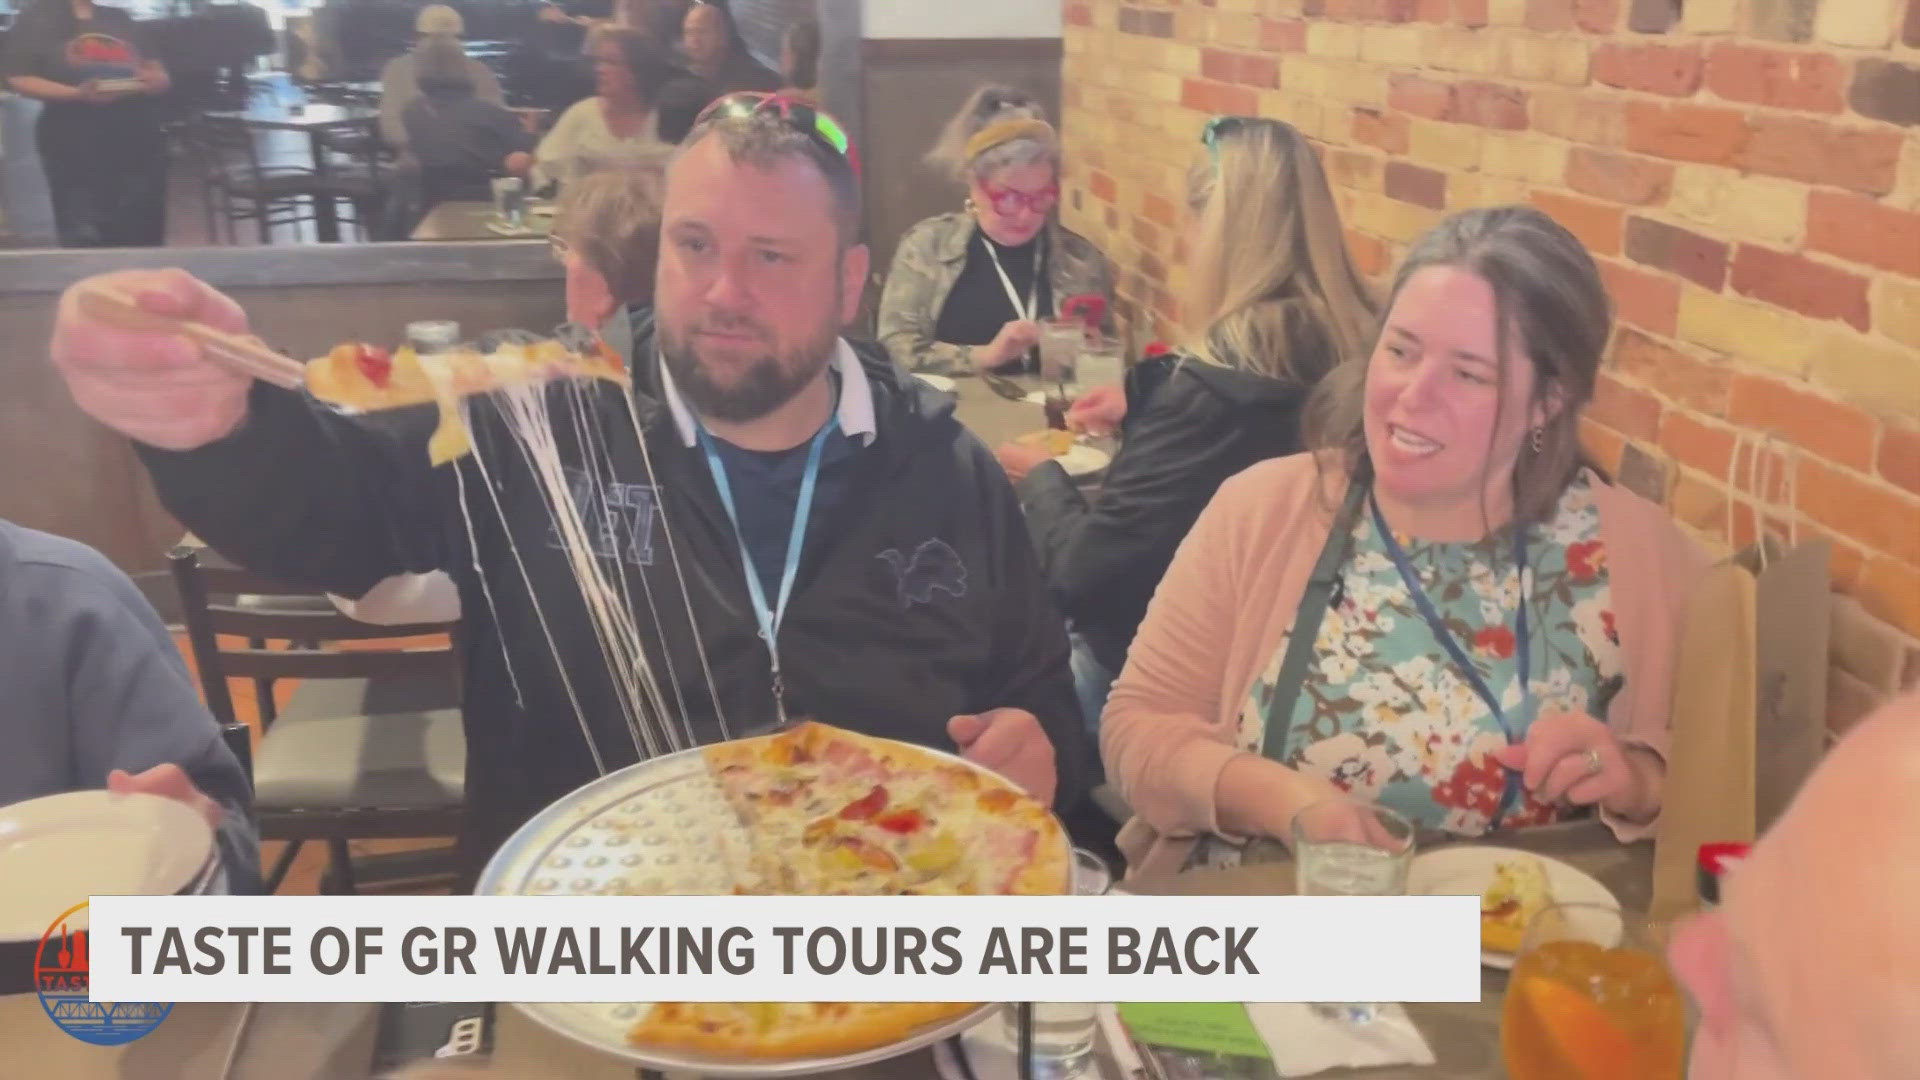 You can book a walking tour right now, there are 2 happening each month through October.